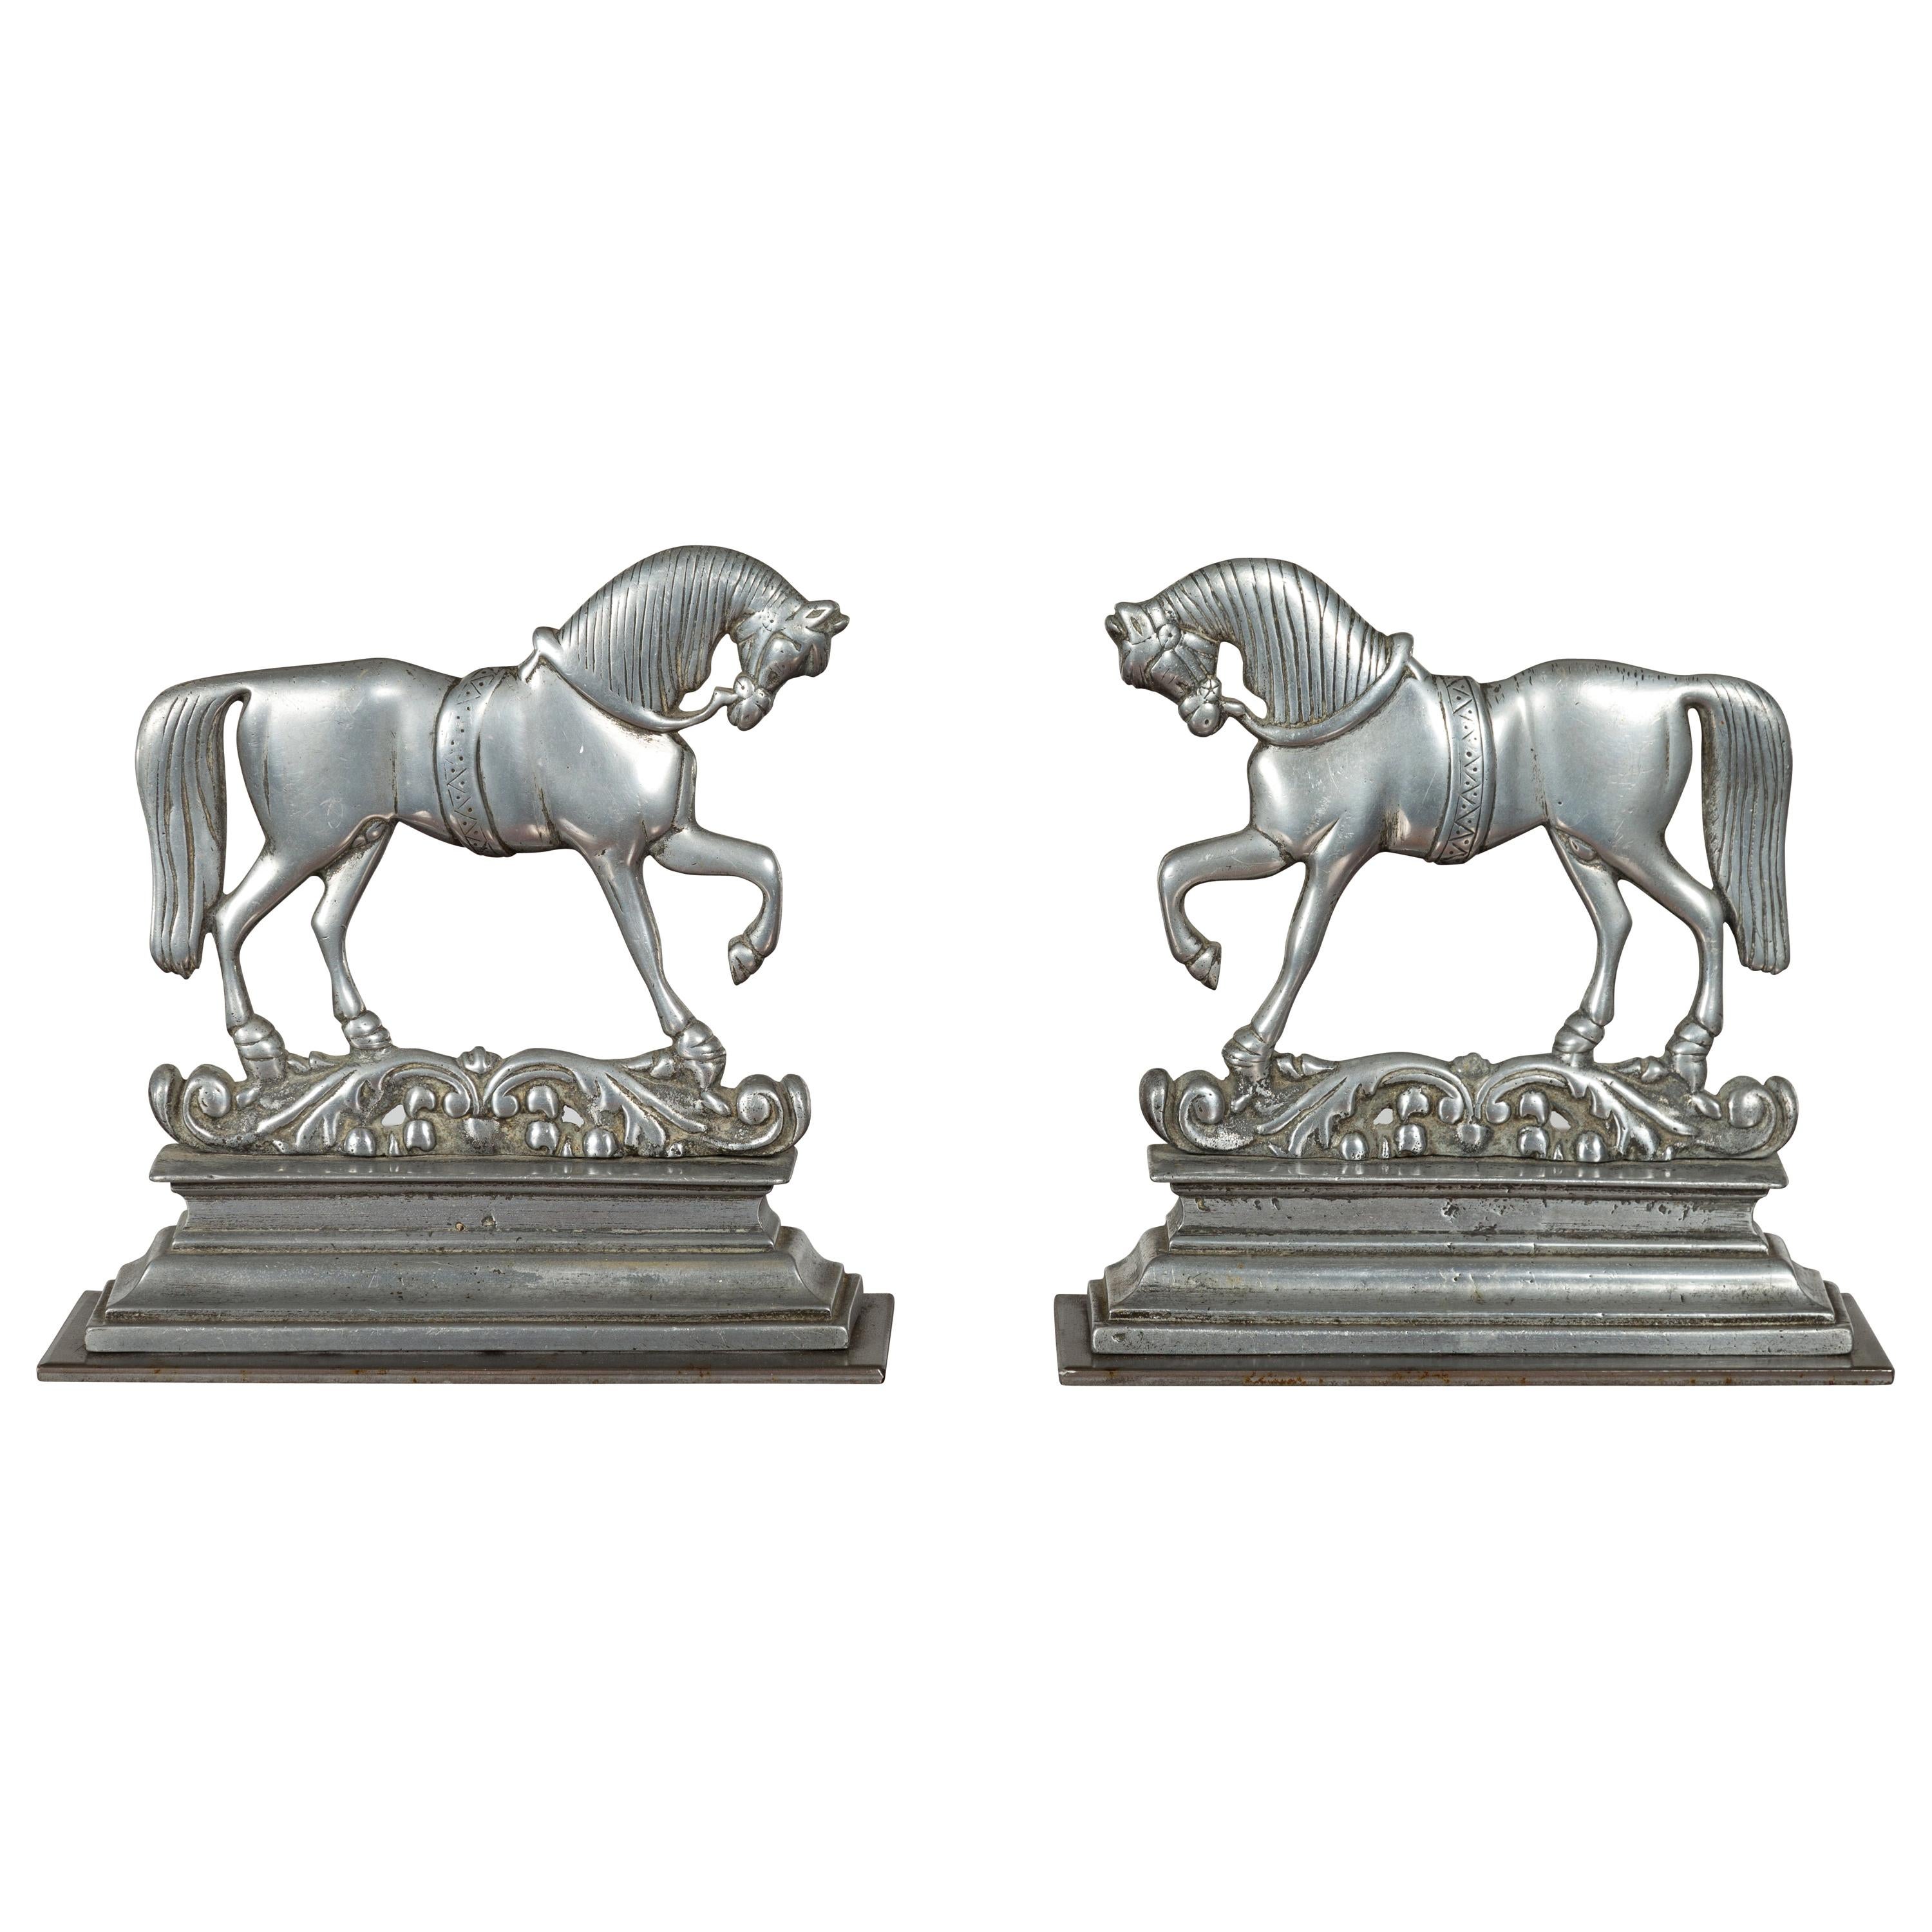 Pair of English Turn of the Century Metal Bookends Depicting Prancing Horses